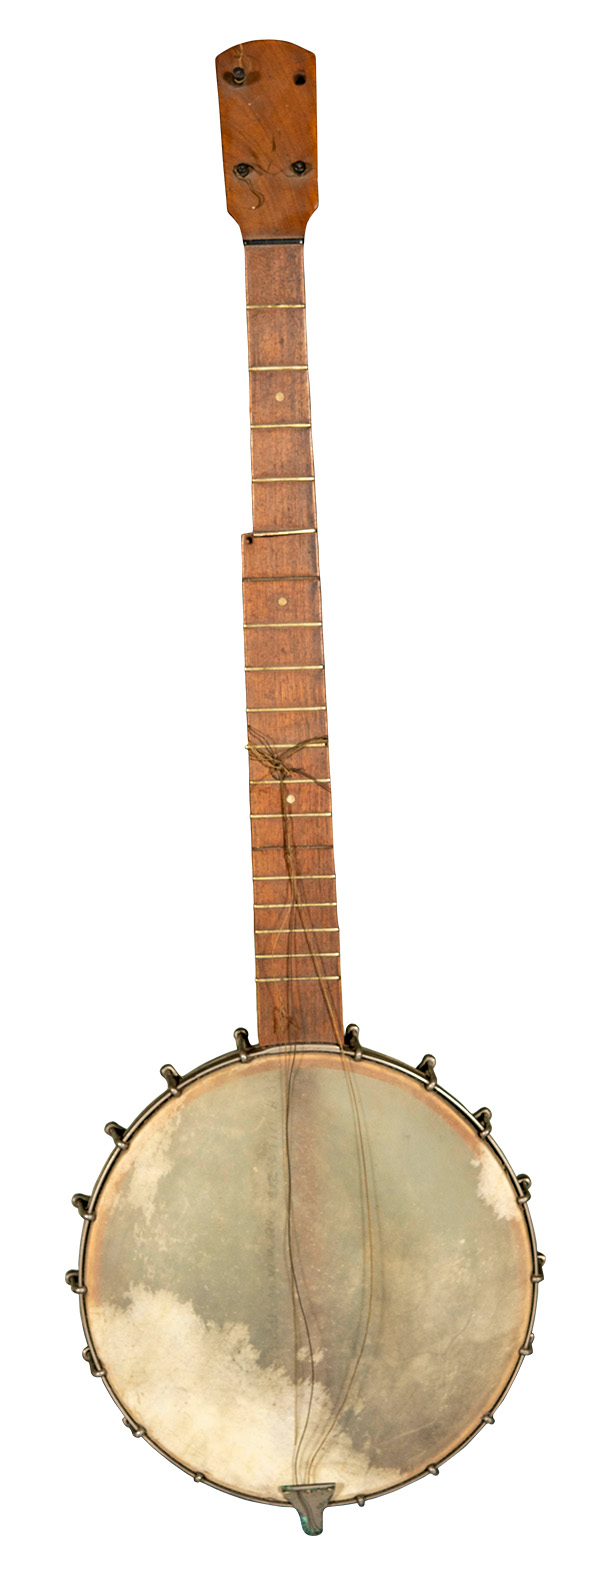 An old antique banjo without strings